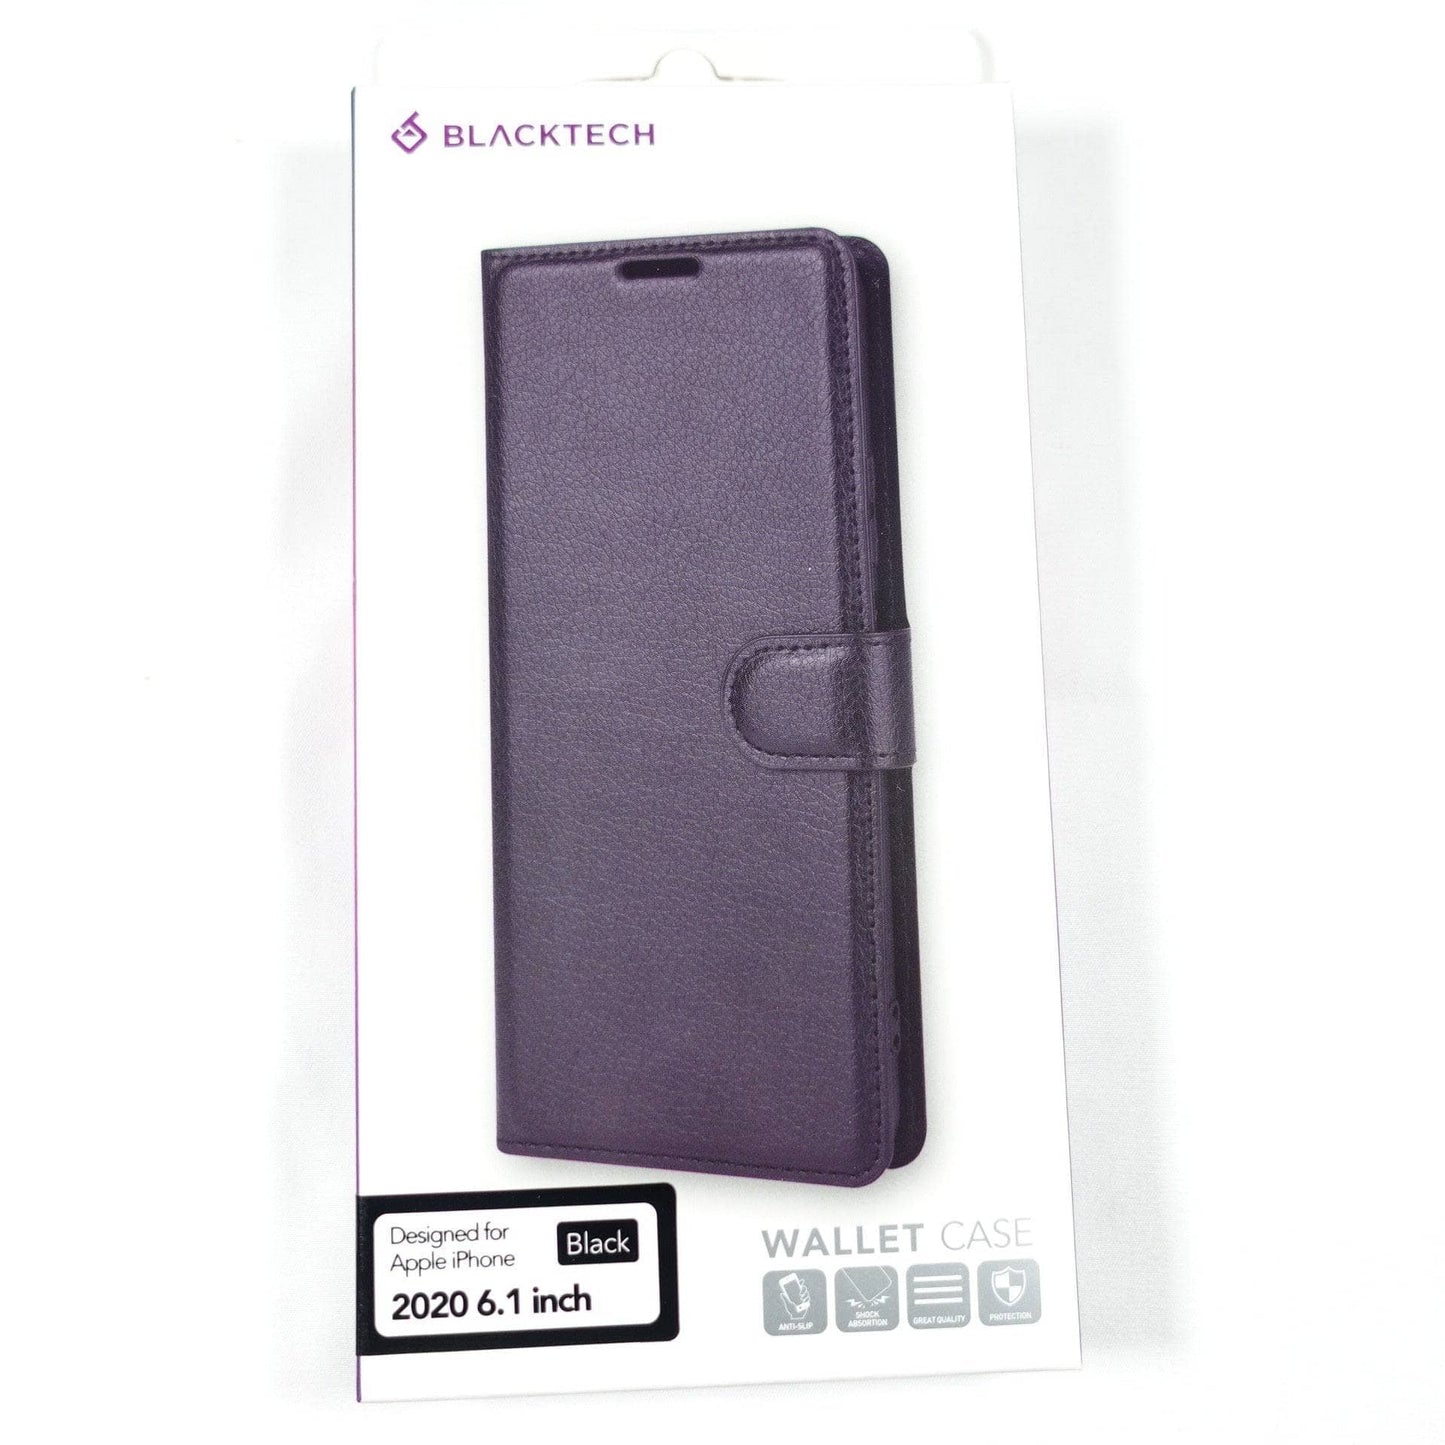 Blacktech Wallet Case for iPhone 12 Pro Max /12/ 12 Mini with ID Pockets Stand Folio-Phone Case-Blacktech-www.PhoneGuy.com.au